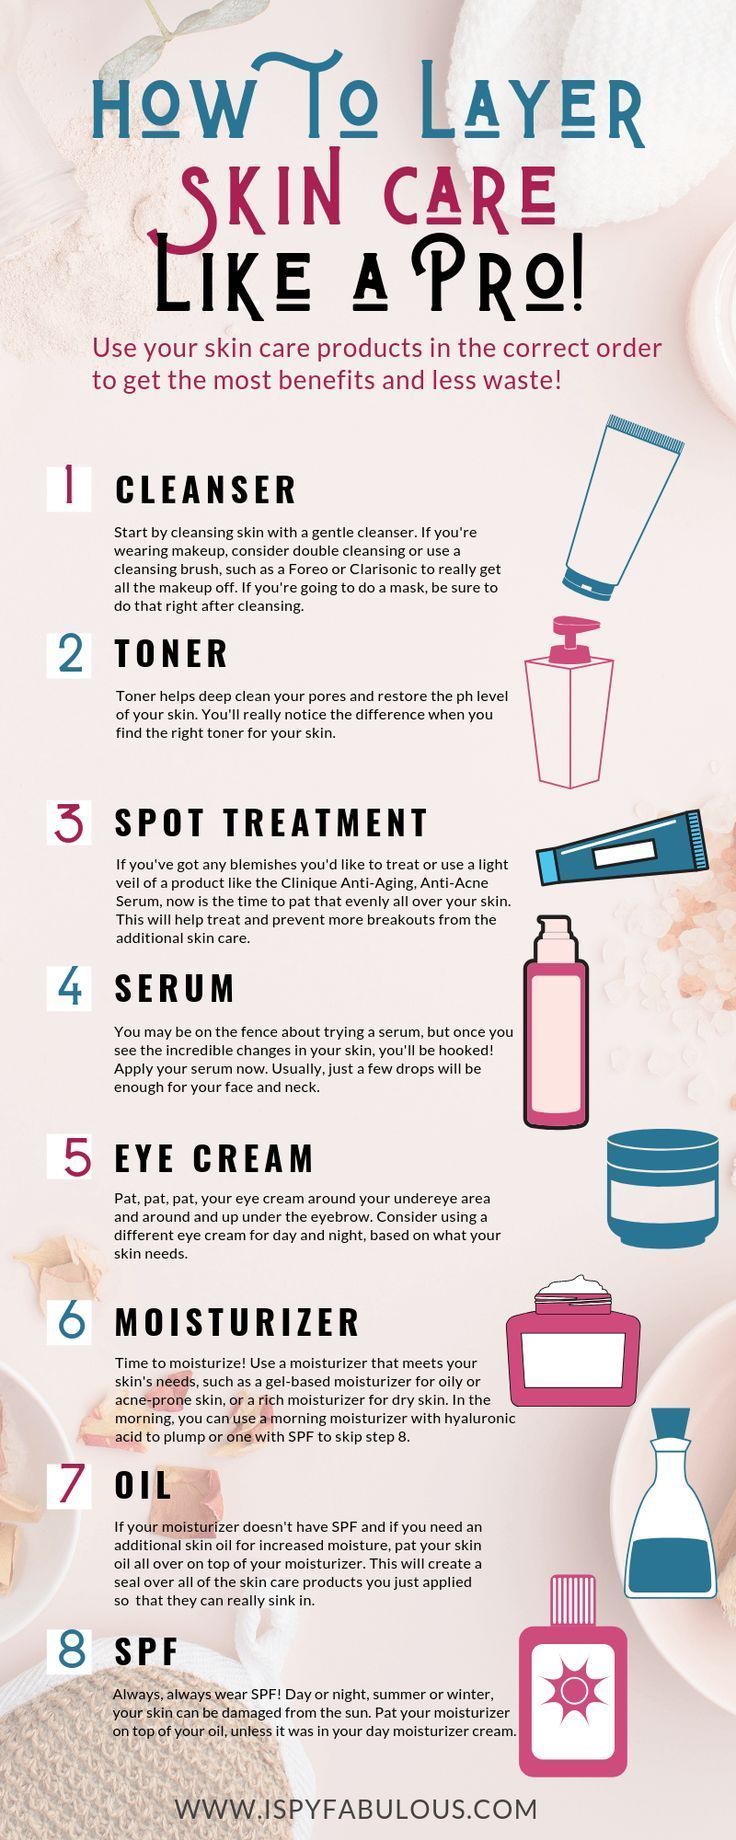 How To Layer Your Skin Care Like a Pro!